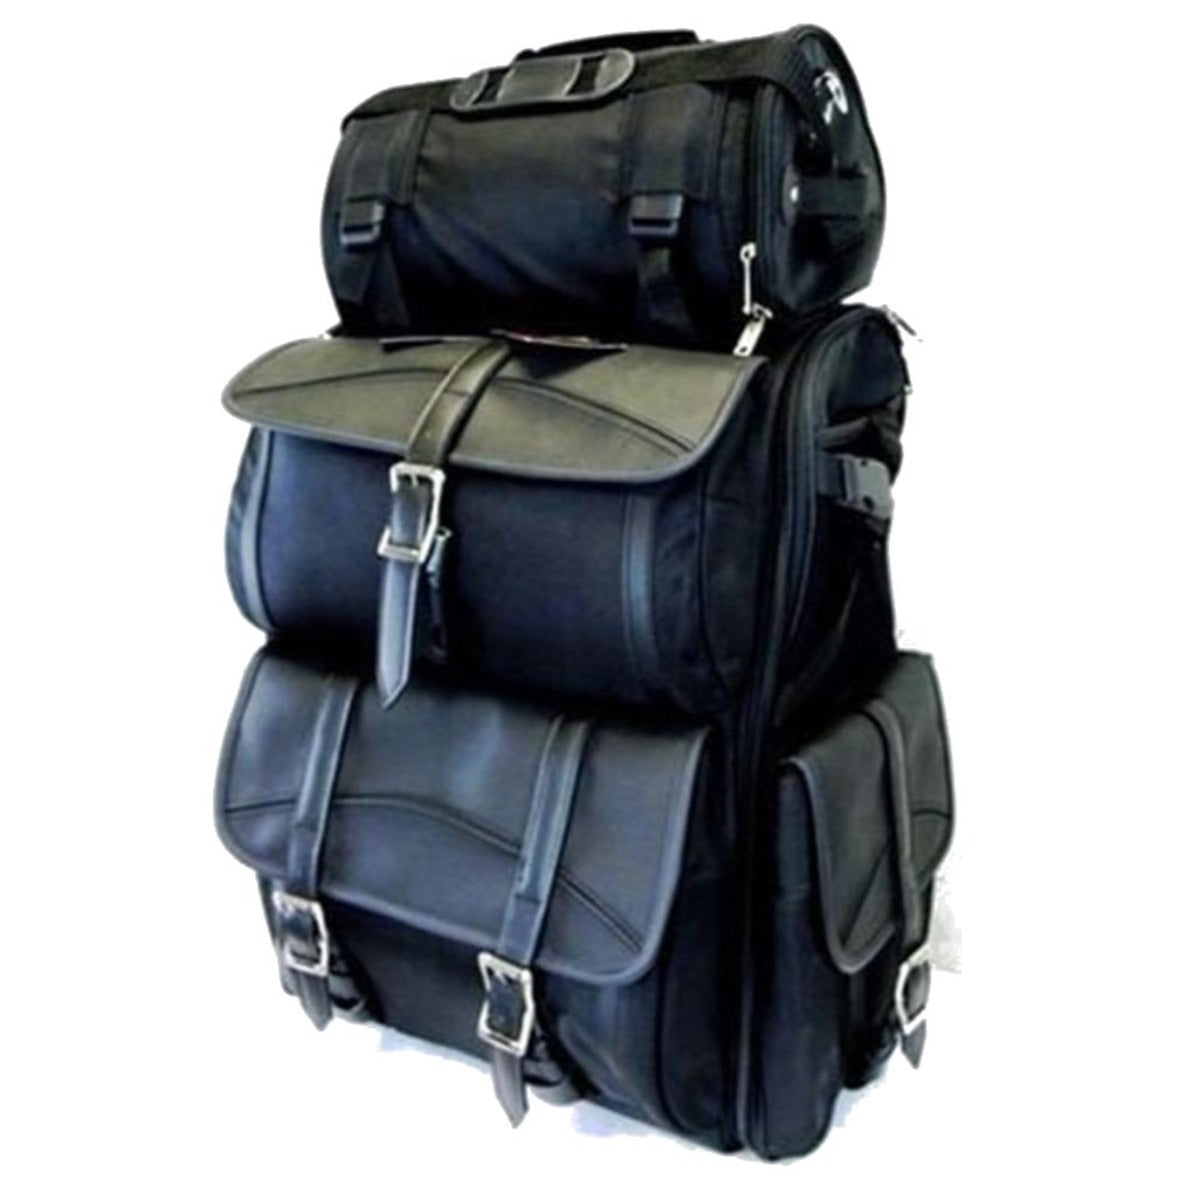 Vance Leather Extra Large Deluxe Touring Bag